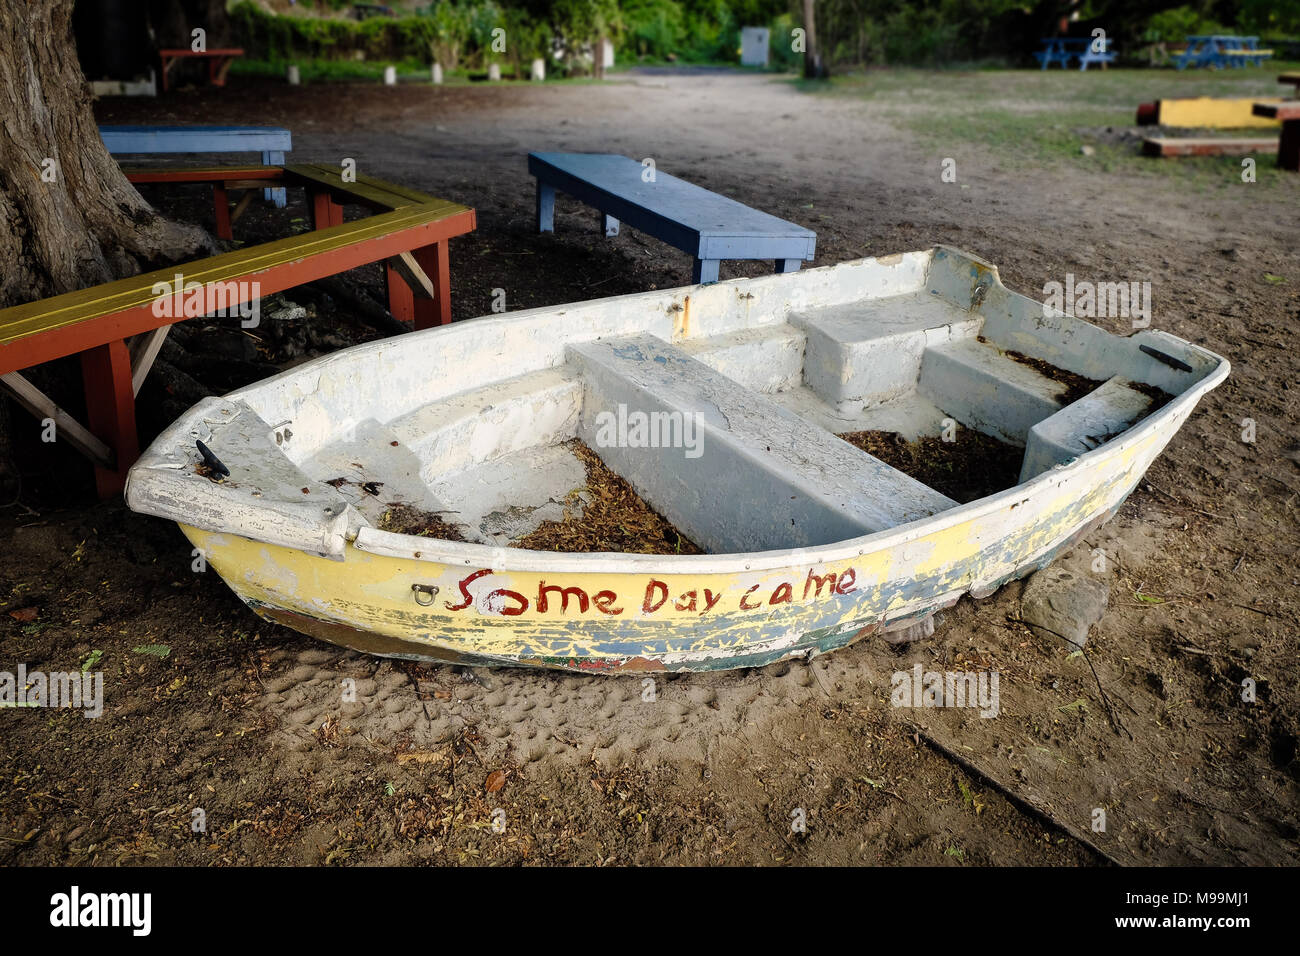 A white dingy rests on a beach under a tree on the island of St John in the US Virgin Islands. Stock Photo